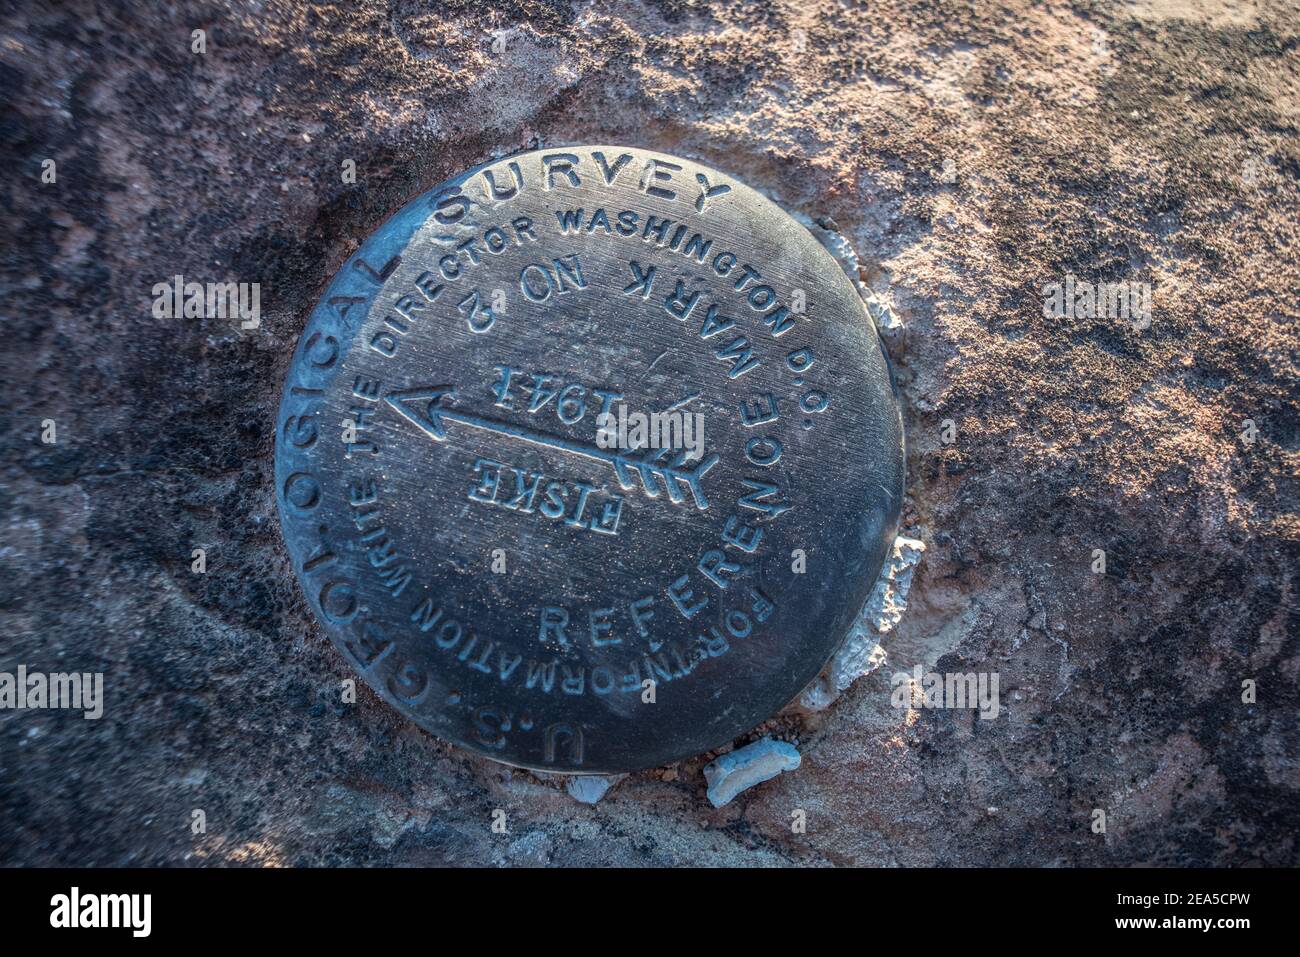 A US Geological survey marker from 1941 in Berryessa snow mountain national monument in Yolo County, California. Stock Photo